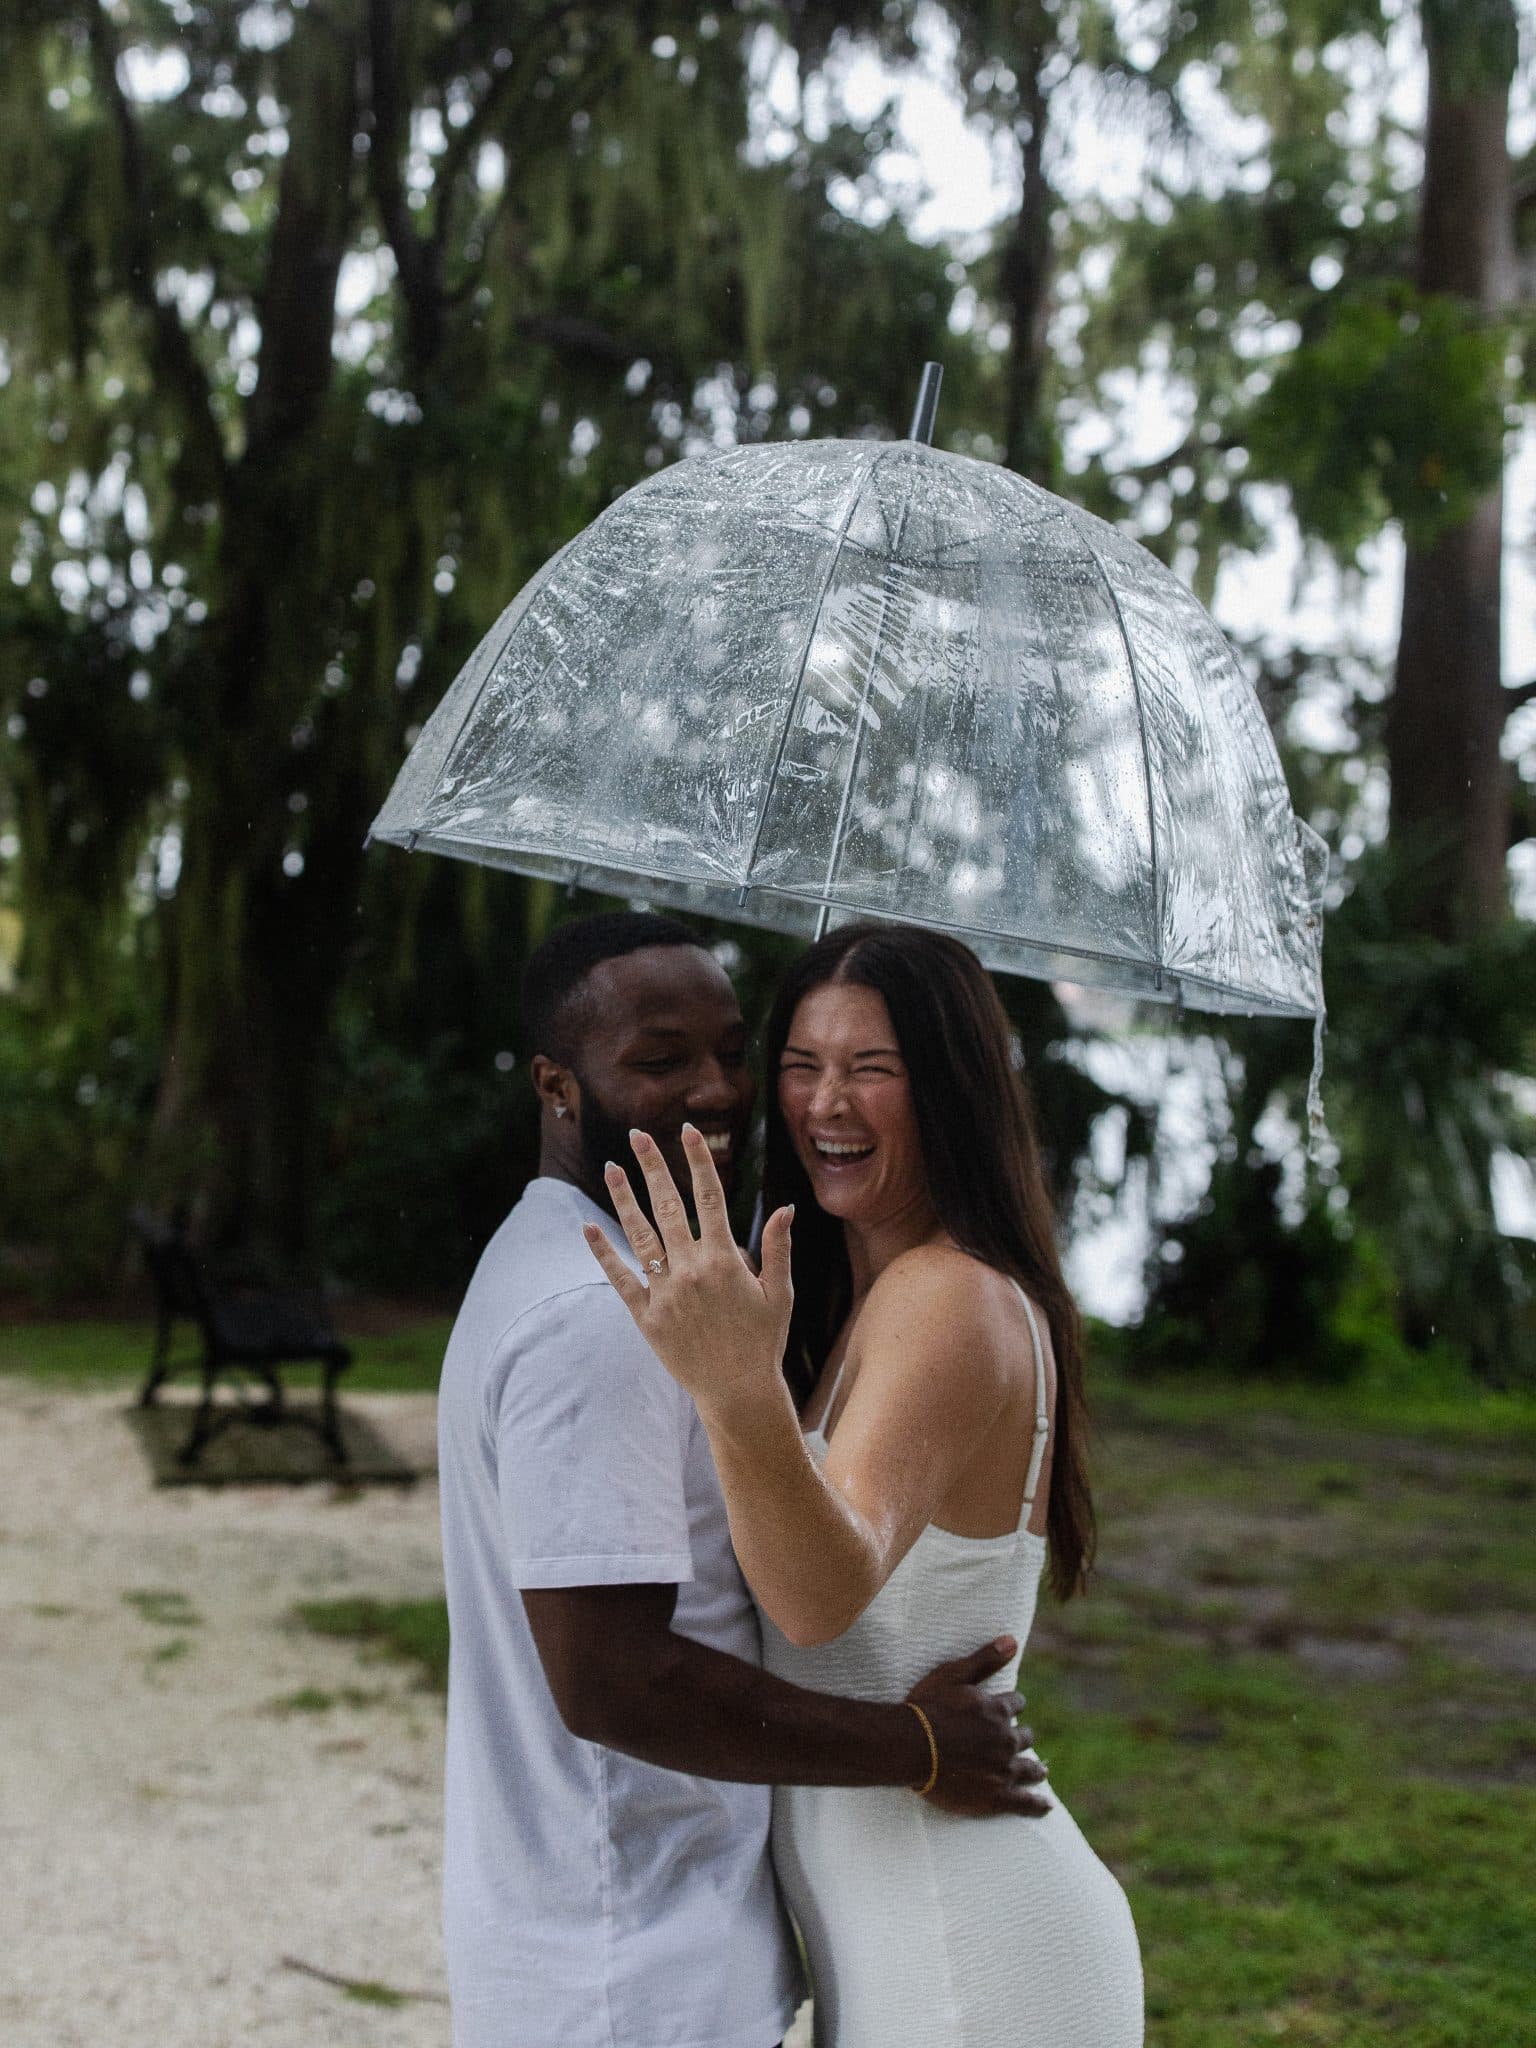 couple pose together for picture outside in park with clear umbrella